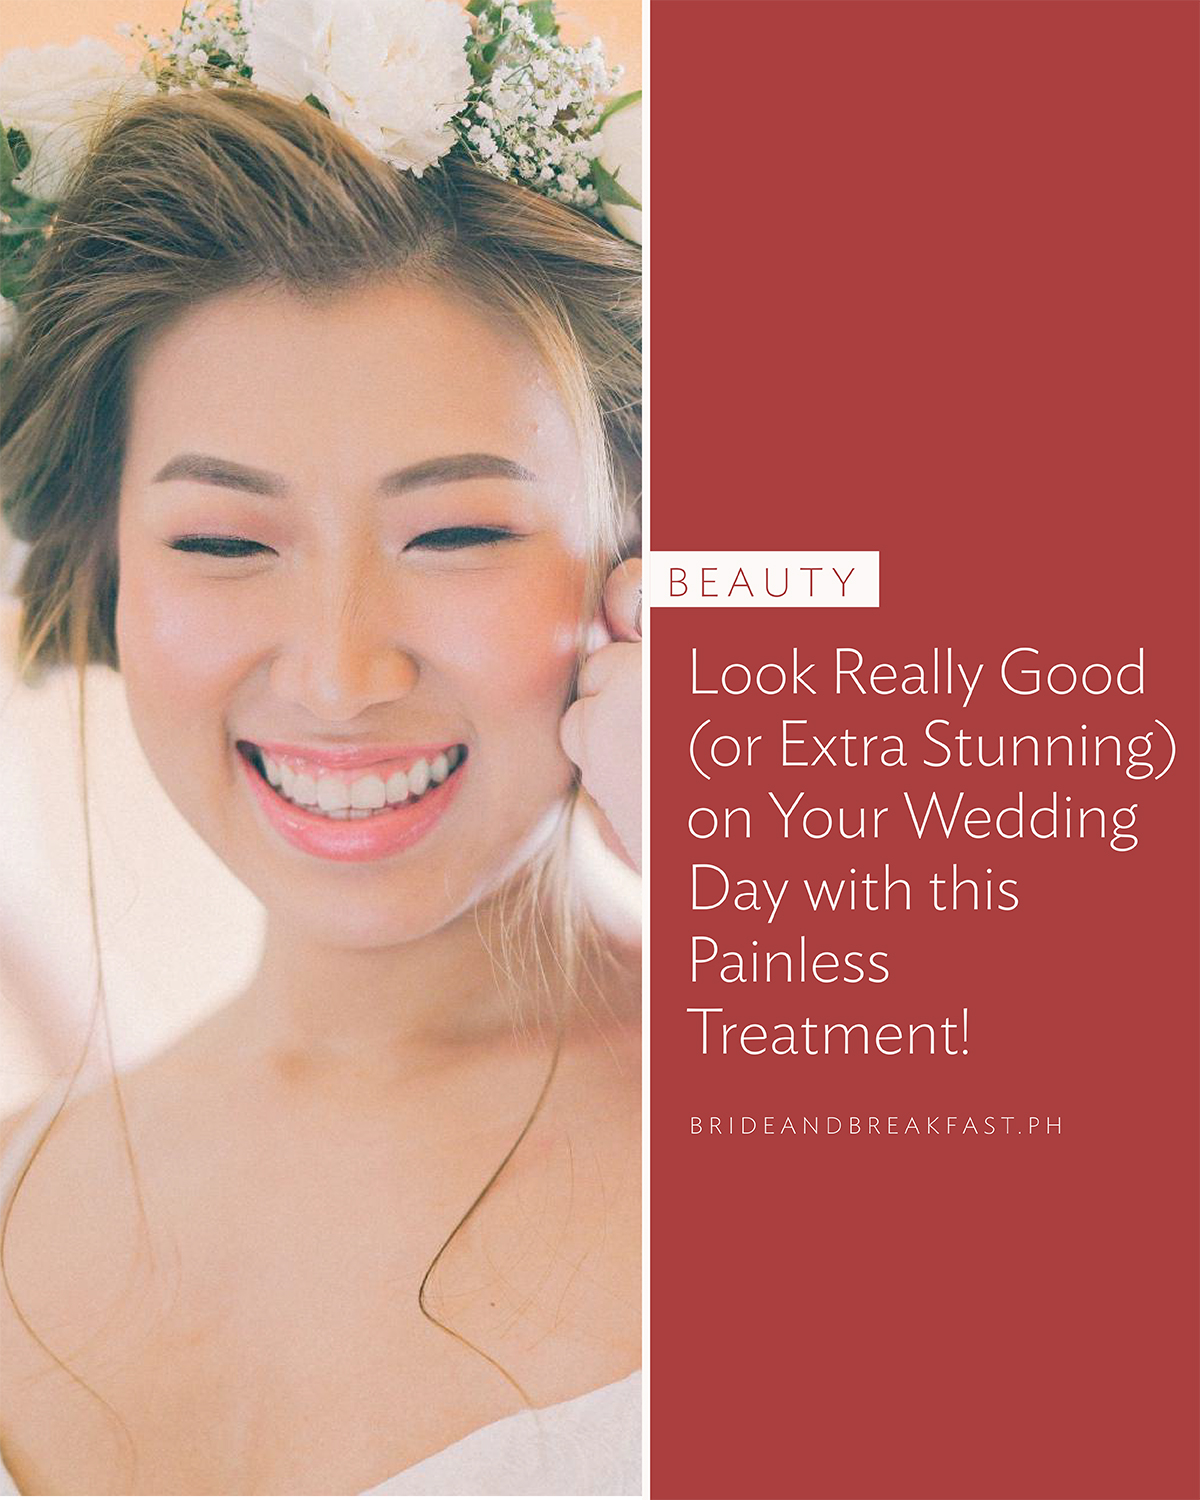 Look really good (or extra stunning) on your wedding day with this painless treatment!